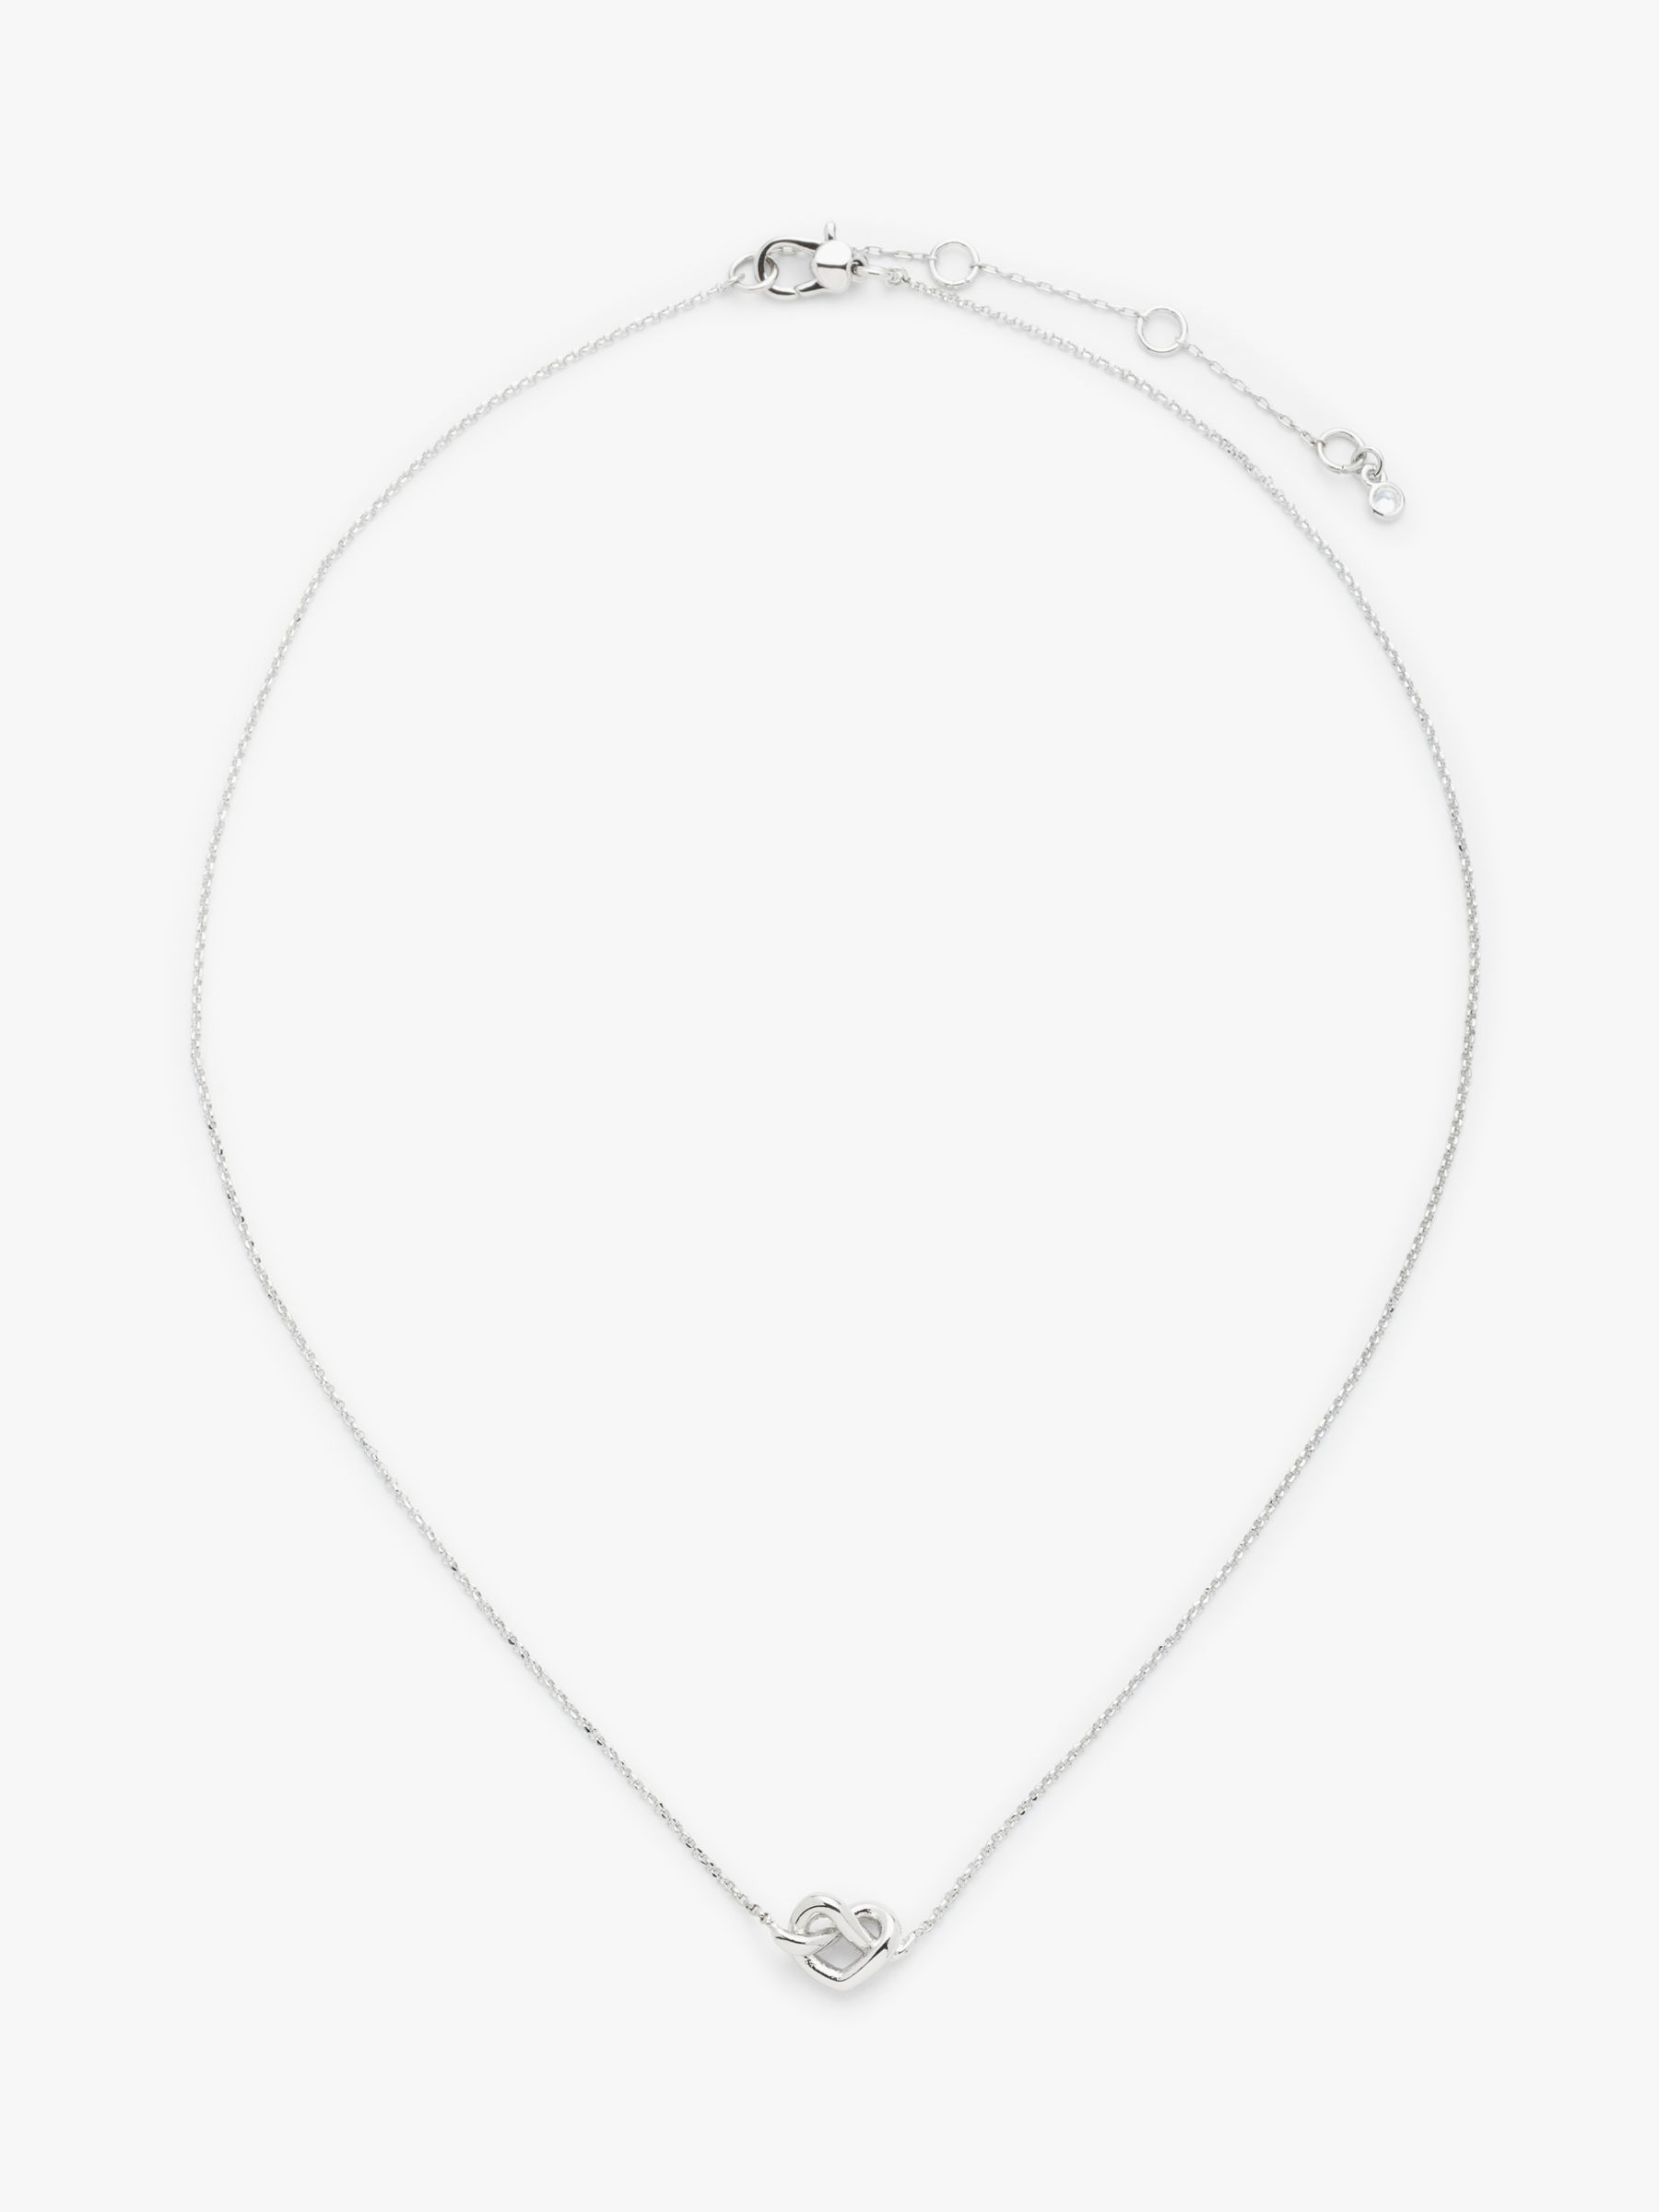 kate spade new york Loves Me Knot Heart Pendant Necklace, Silver at John  Lewis & Partners